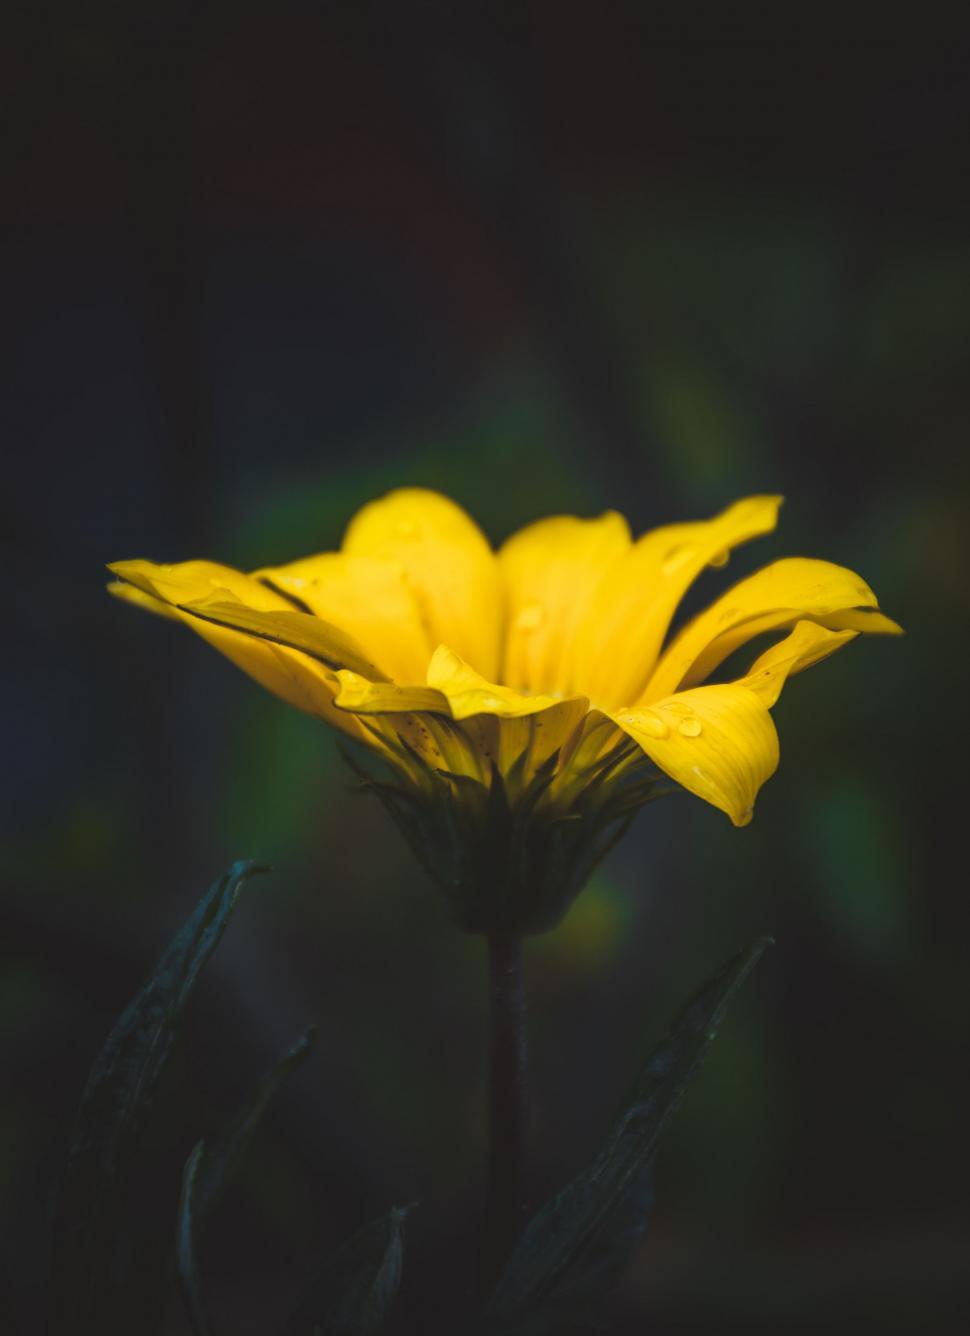 Free Image of Nature yellow sunflower flower daisy plant flora blossom bloom spring floral bright close petal flowers garden pale yellow fresh color 